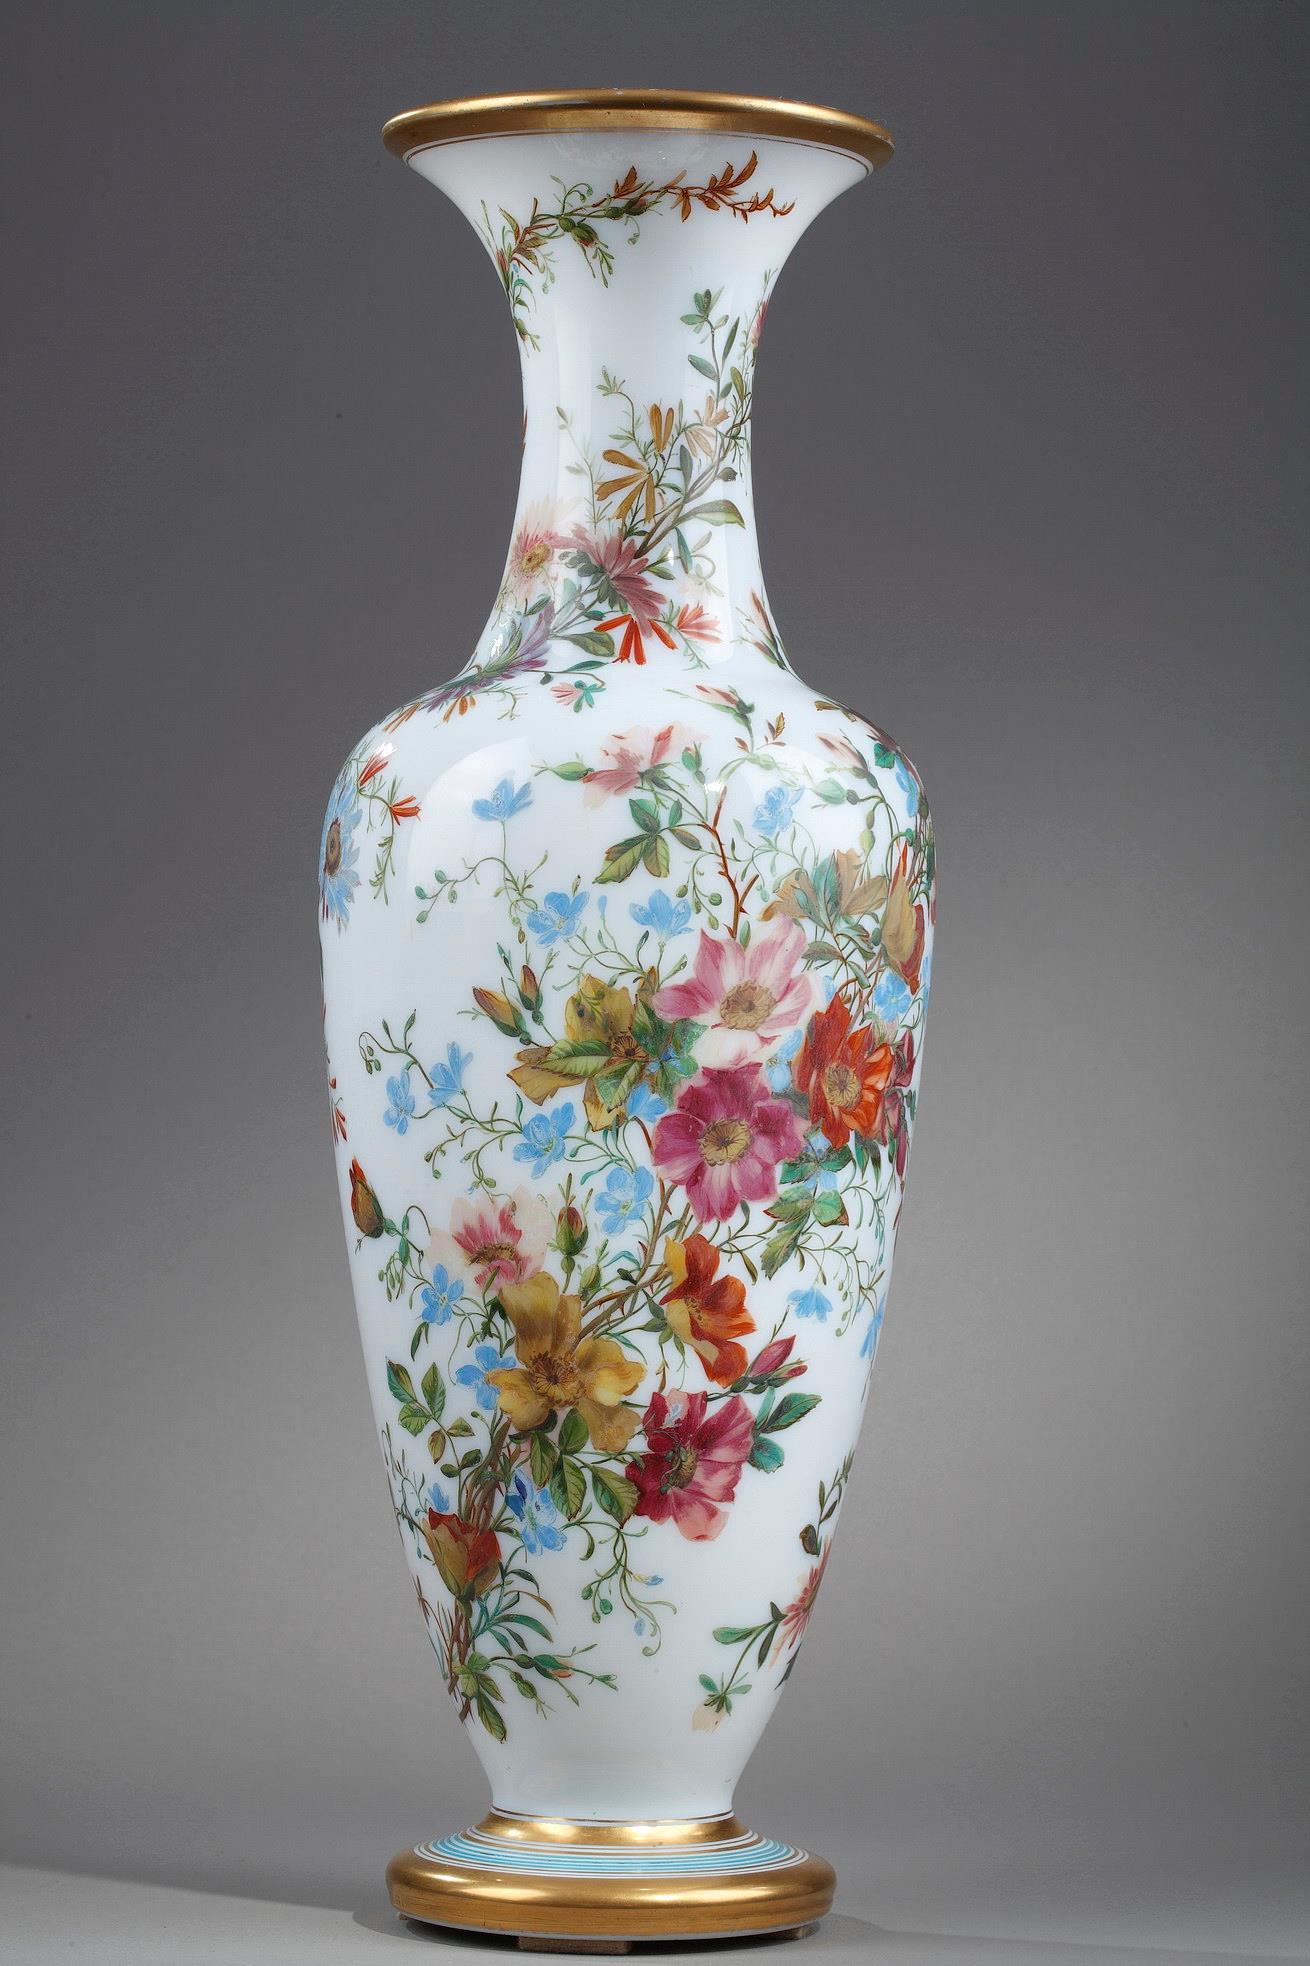 Opaline Vase with Polychrome Flowers and Gold Bands. 
Mid-19th century.